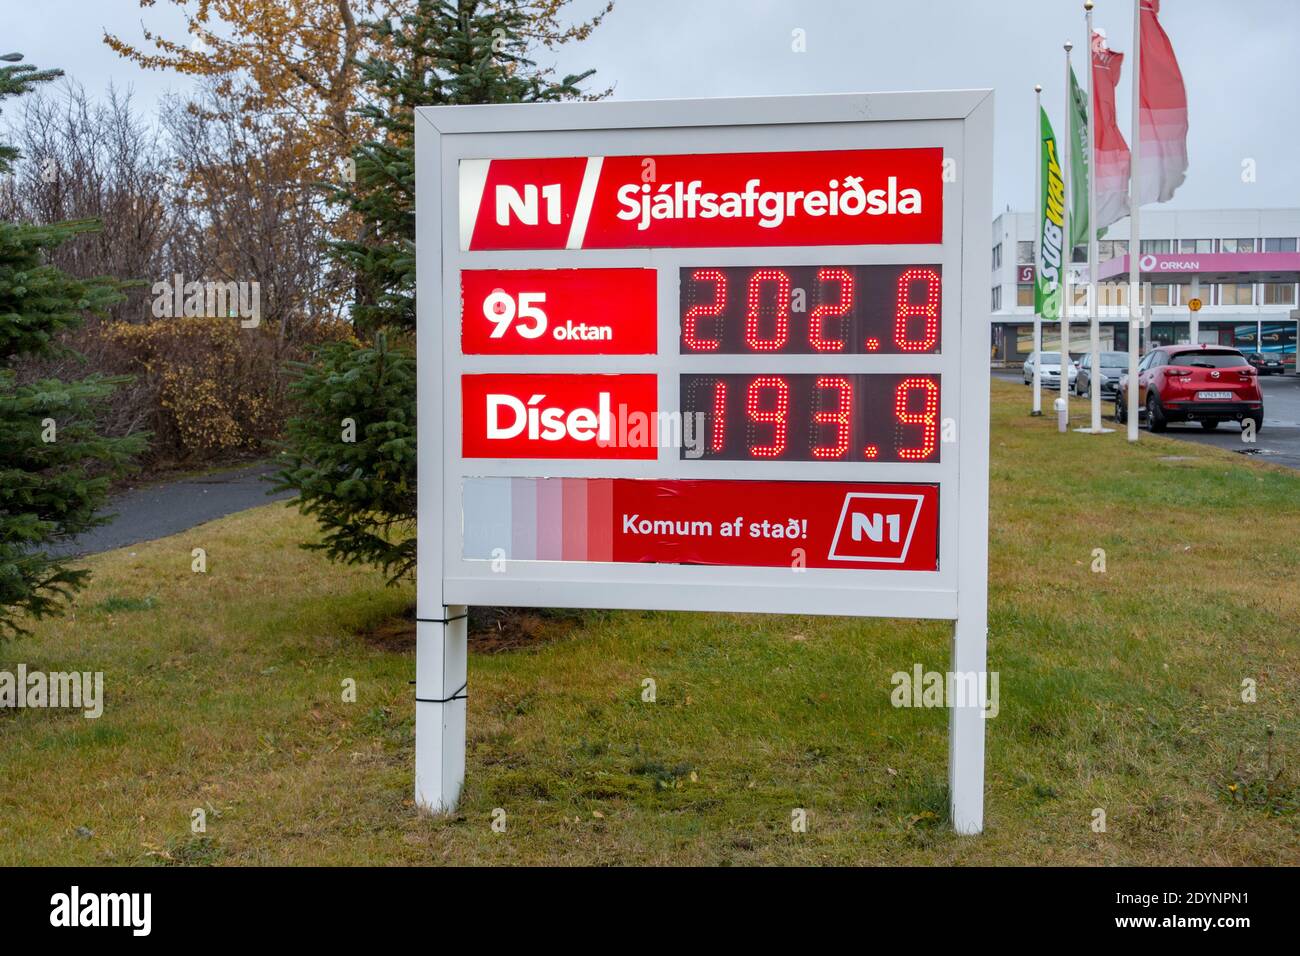 Gasoline Prices At The N1 Filling Petrol Gas Station Service Centre In Hafnarfjordur Iceland October 2017 Stock Photo